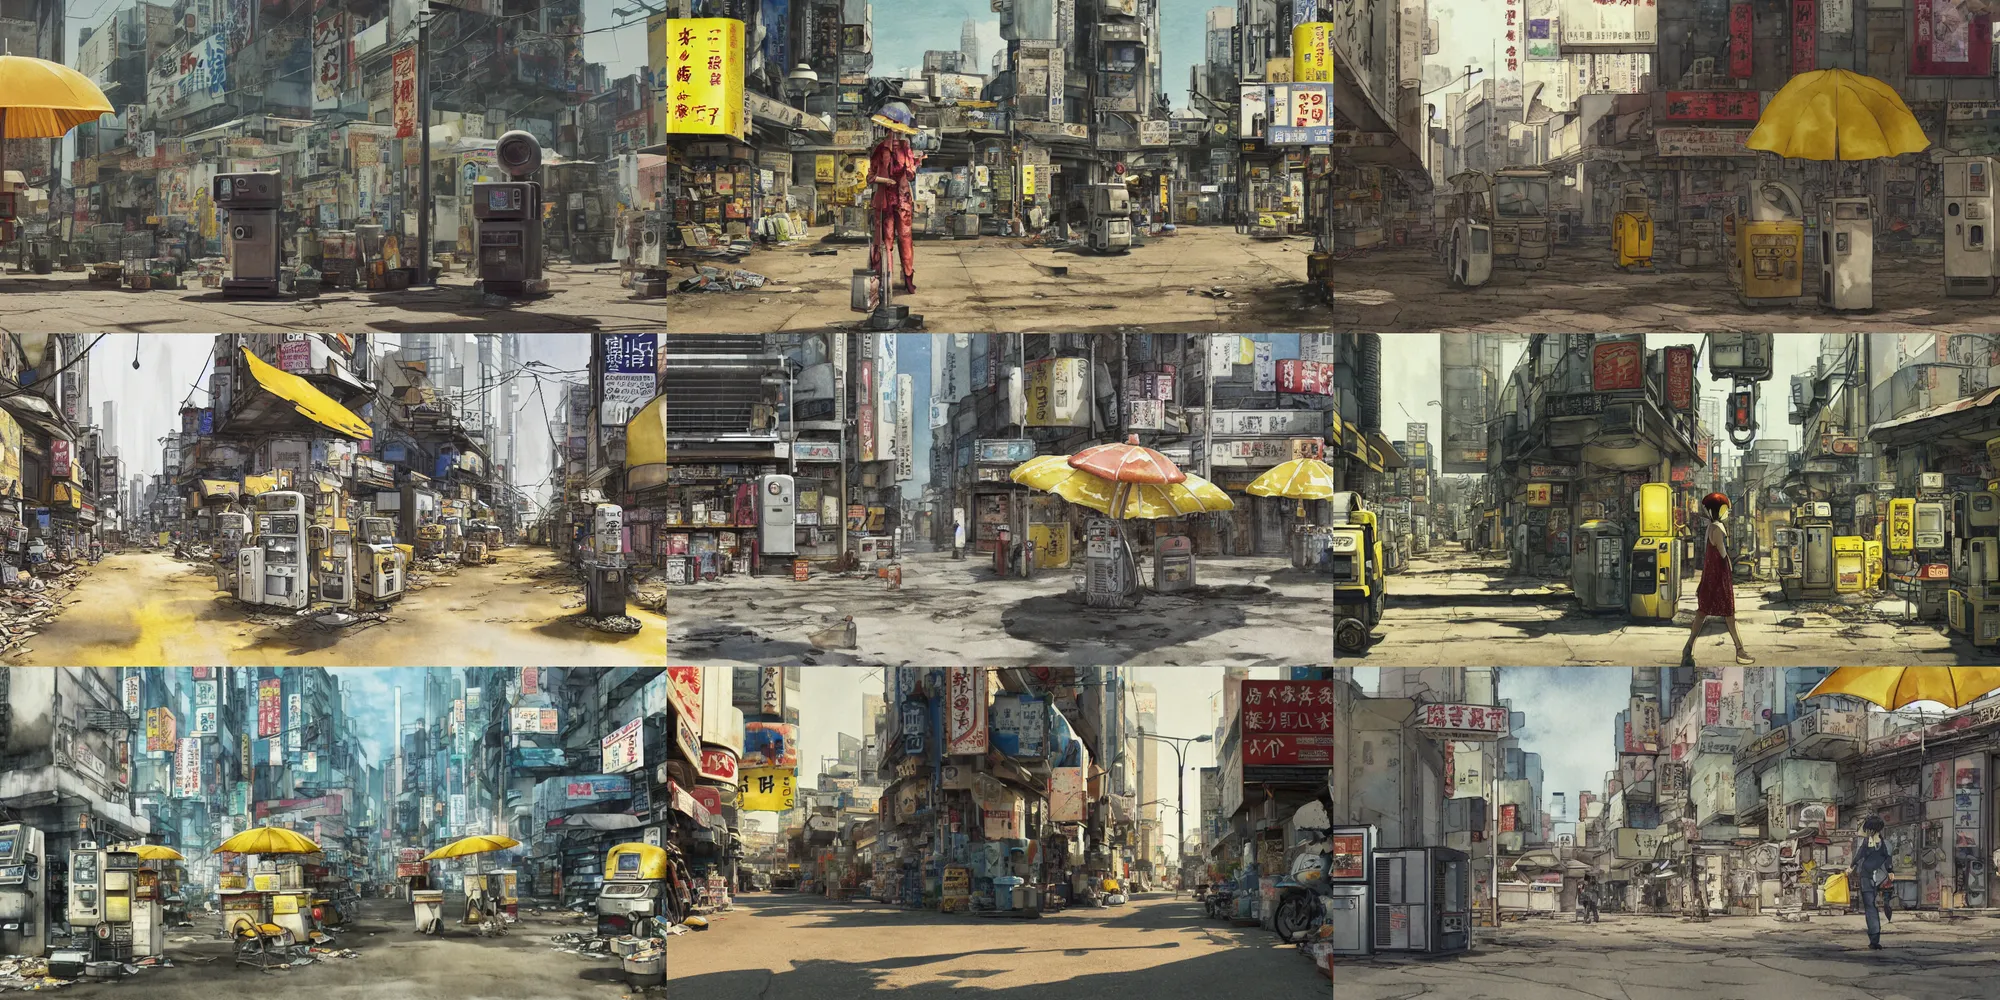 Prompt: incredible wide screenshot, simple watercolor, paper texture, water color paper, ghost in the shell movie scene, distant shot of walking vending machine under a yellow striped parasol in deserted dusty shinjuku junk town, old pawn shop, bright sun bleached ground , vending machine robot monster lurks in the background, animatronic, air conditioners, ducts, vents, pipes, black smoke, pale beige sky, junk tv, texture, strange, impossible, fur, spines, mouth, pipe brain, shell, brown mud, dust, bored expression, overhead wires, telephone pole, dusty, dry, pencil marks, genius party,shinjuku, koji morimoto, katsuya terada, masamune shirow, tatsuyuki tanaka hd, 4k, remaster, dynamic camera angle, deep 3 point perspective, fish eye, dynamic scene